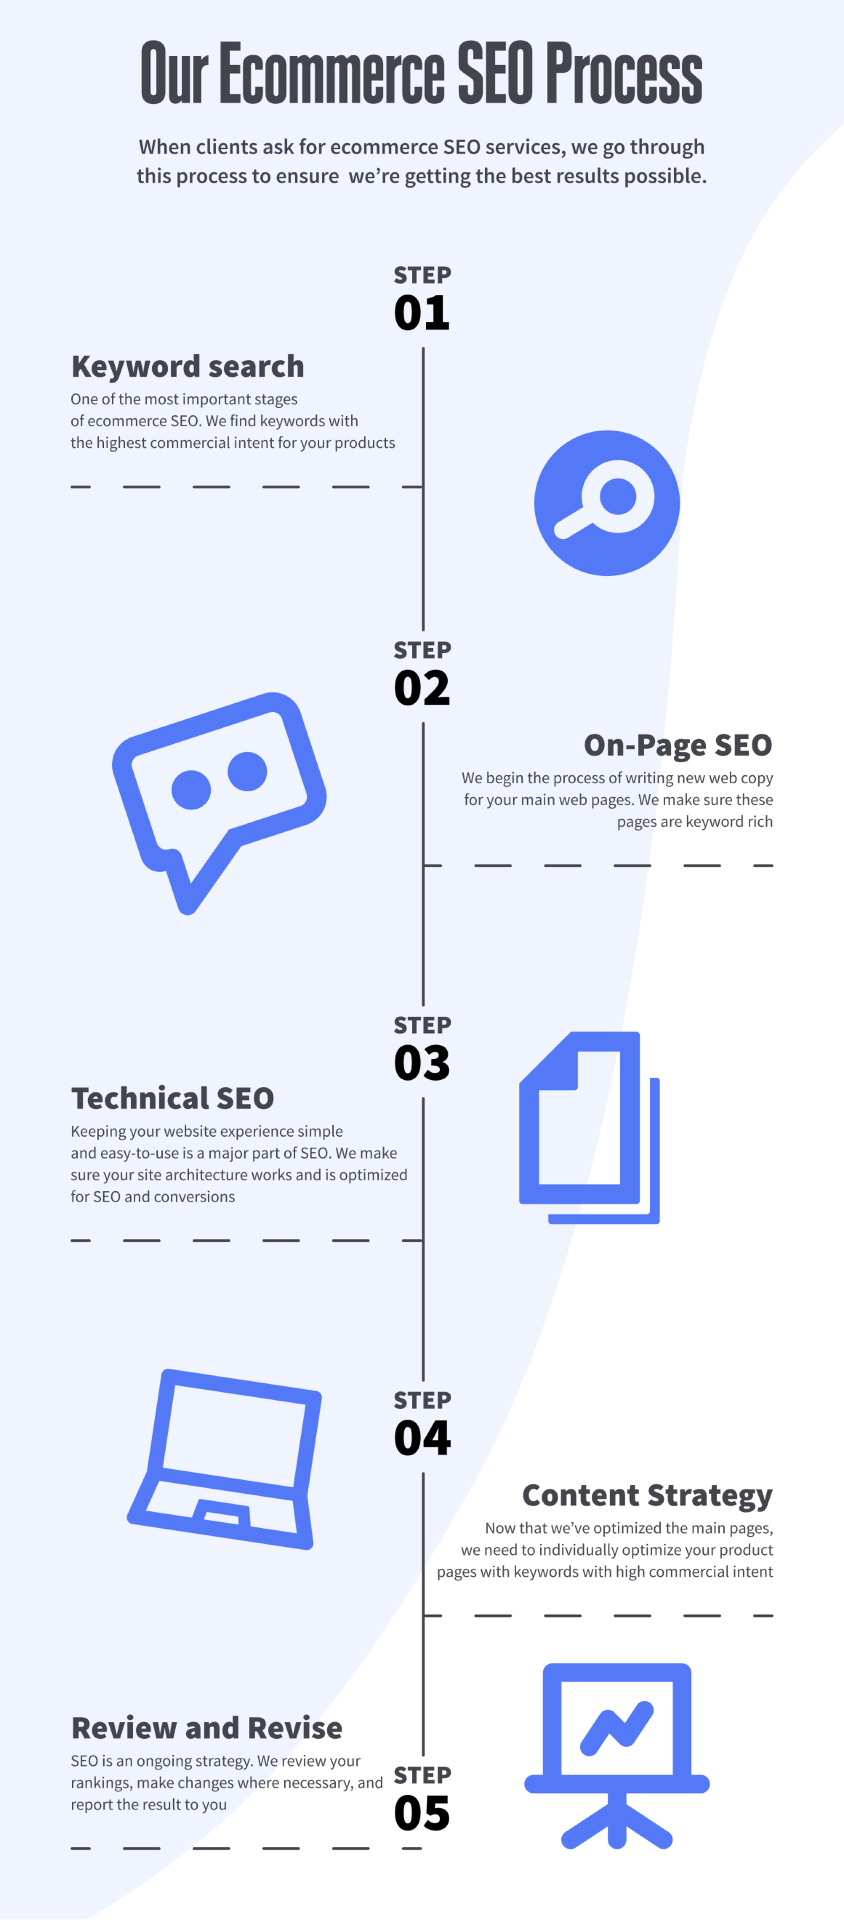 infographic with DLD’s SEO ecommerce process in steps